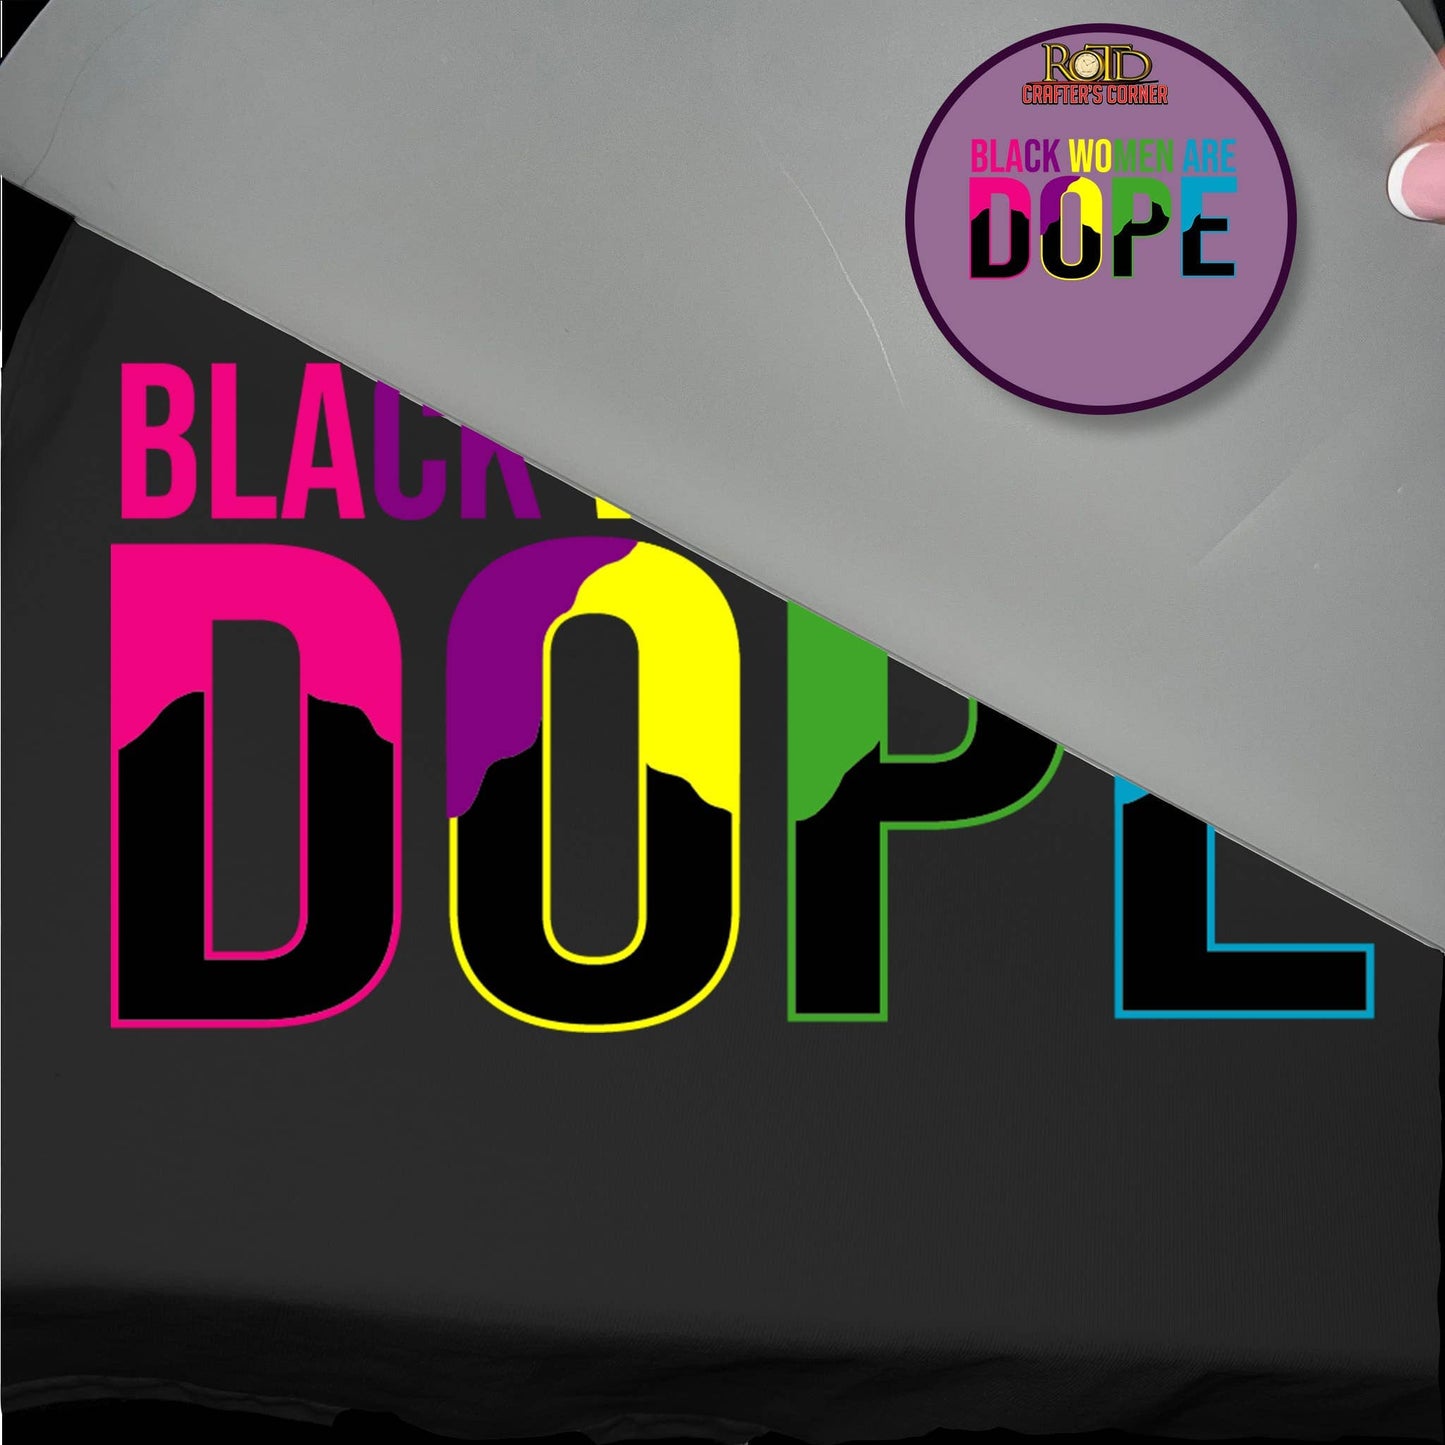 Black Women are Dope DTF Print ROTD Crafter's Corner 